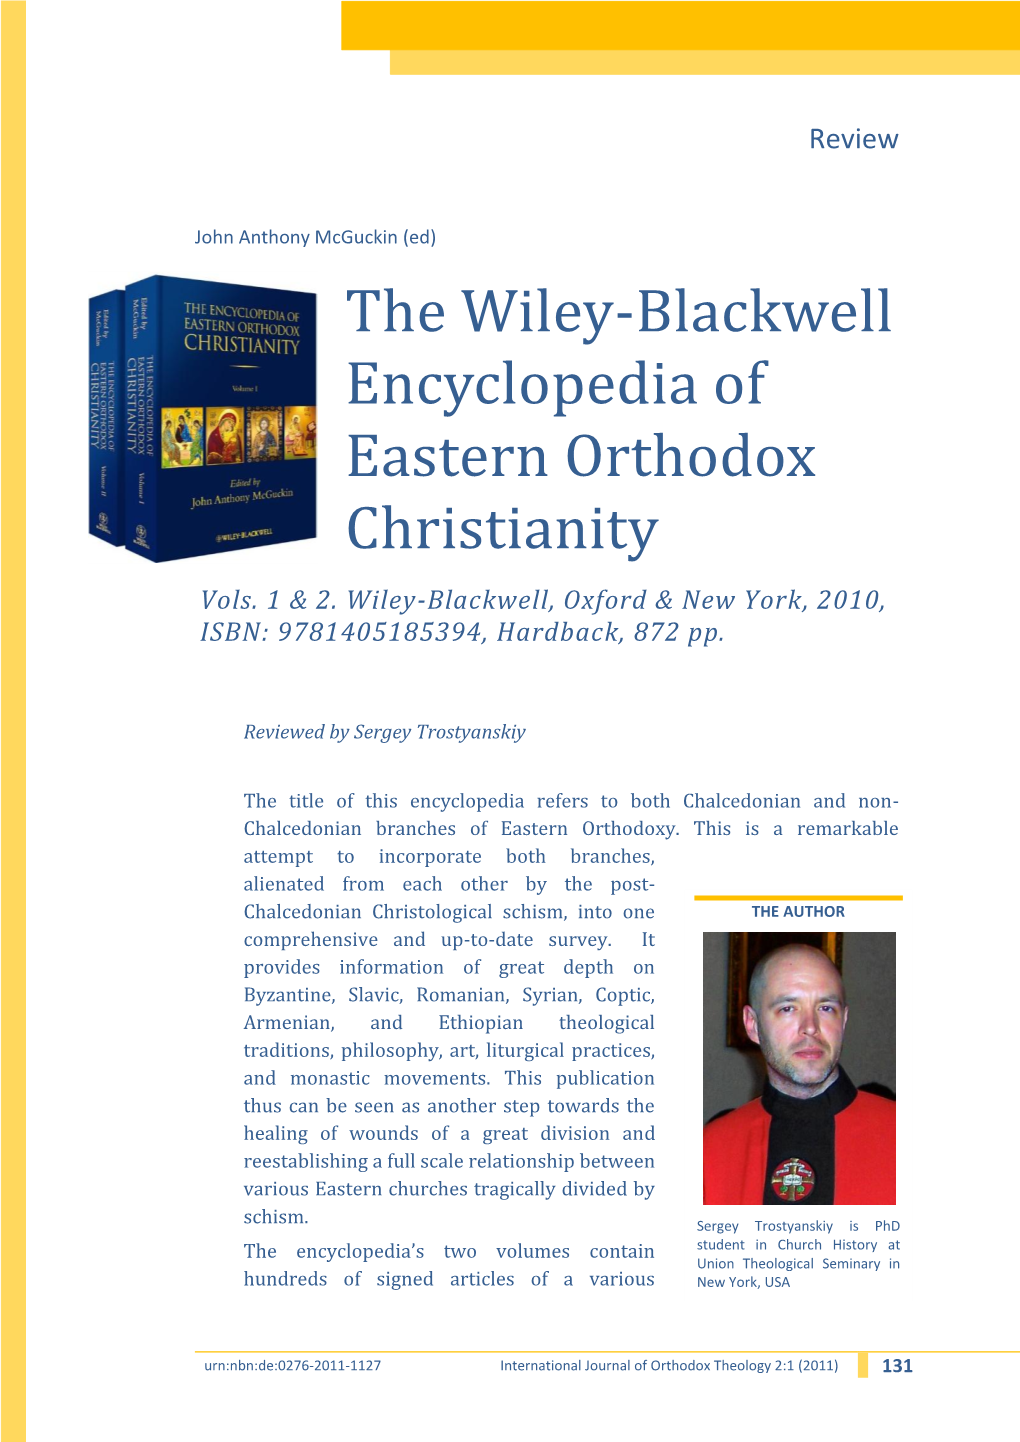 The Wiley-Blackwell Encyclopedia of Eastern Orthodox Christianity Vols